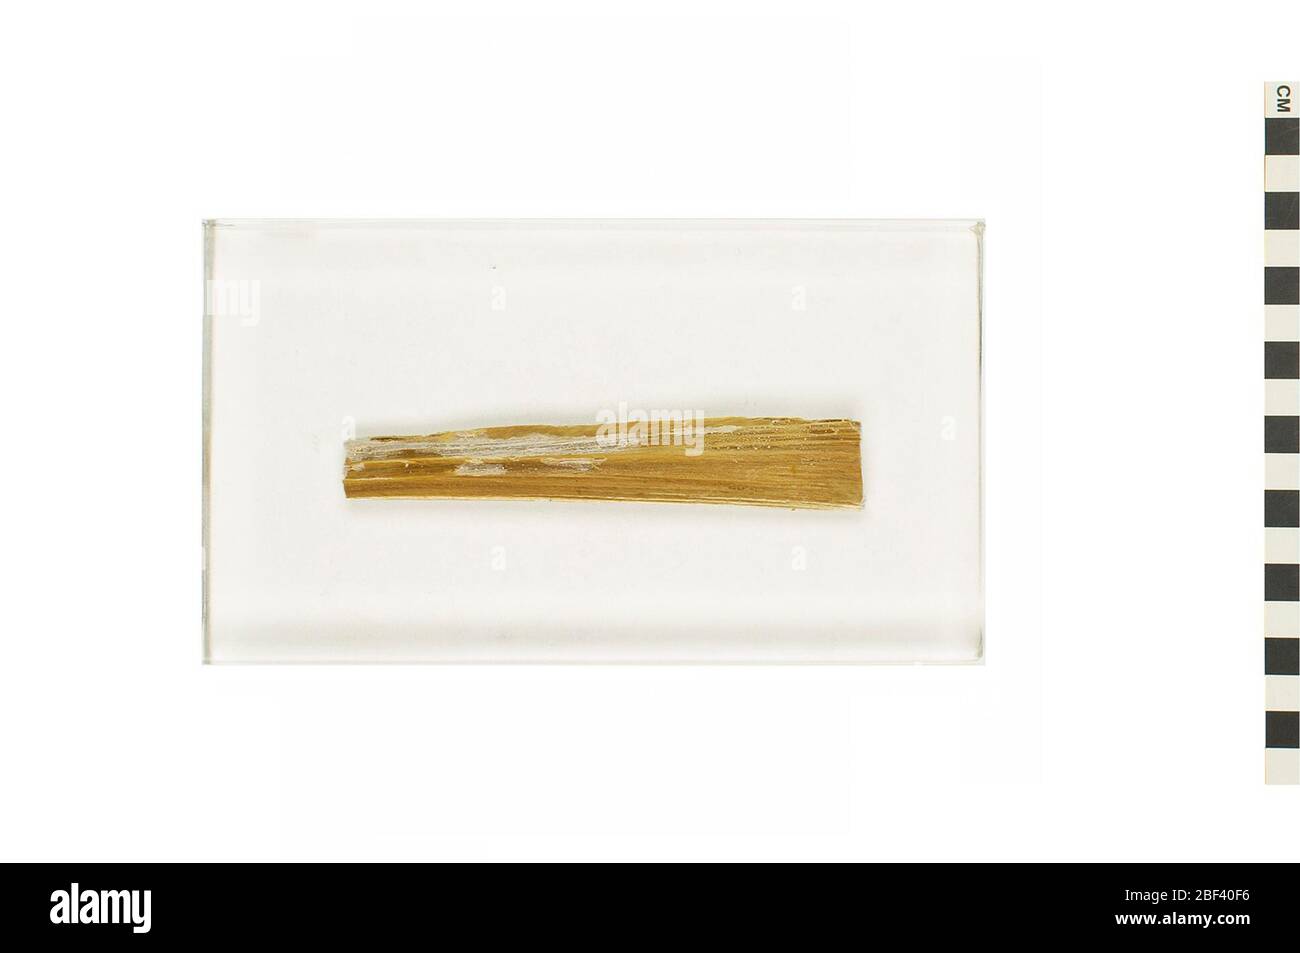 Baleen Whale Rorqual. This object is part of the Education and Outreach collection, some of which are in the Q?rius science education center and available to see.This item is an ear wax plug from the Rorqual (Balaenopteridae) family of whales. Stock Photo